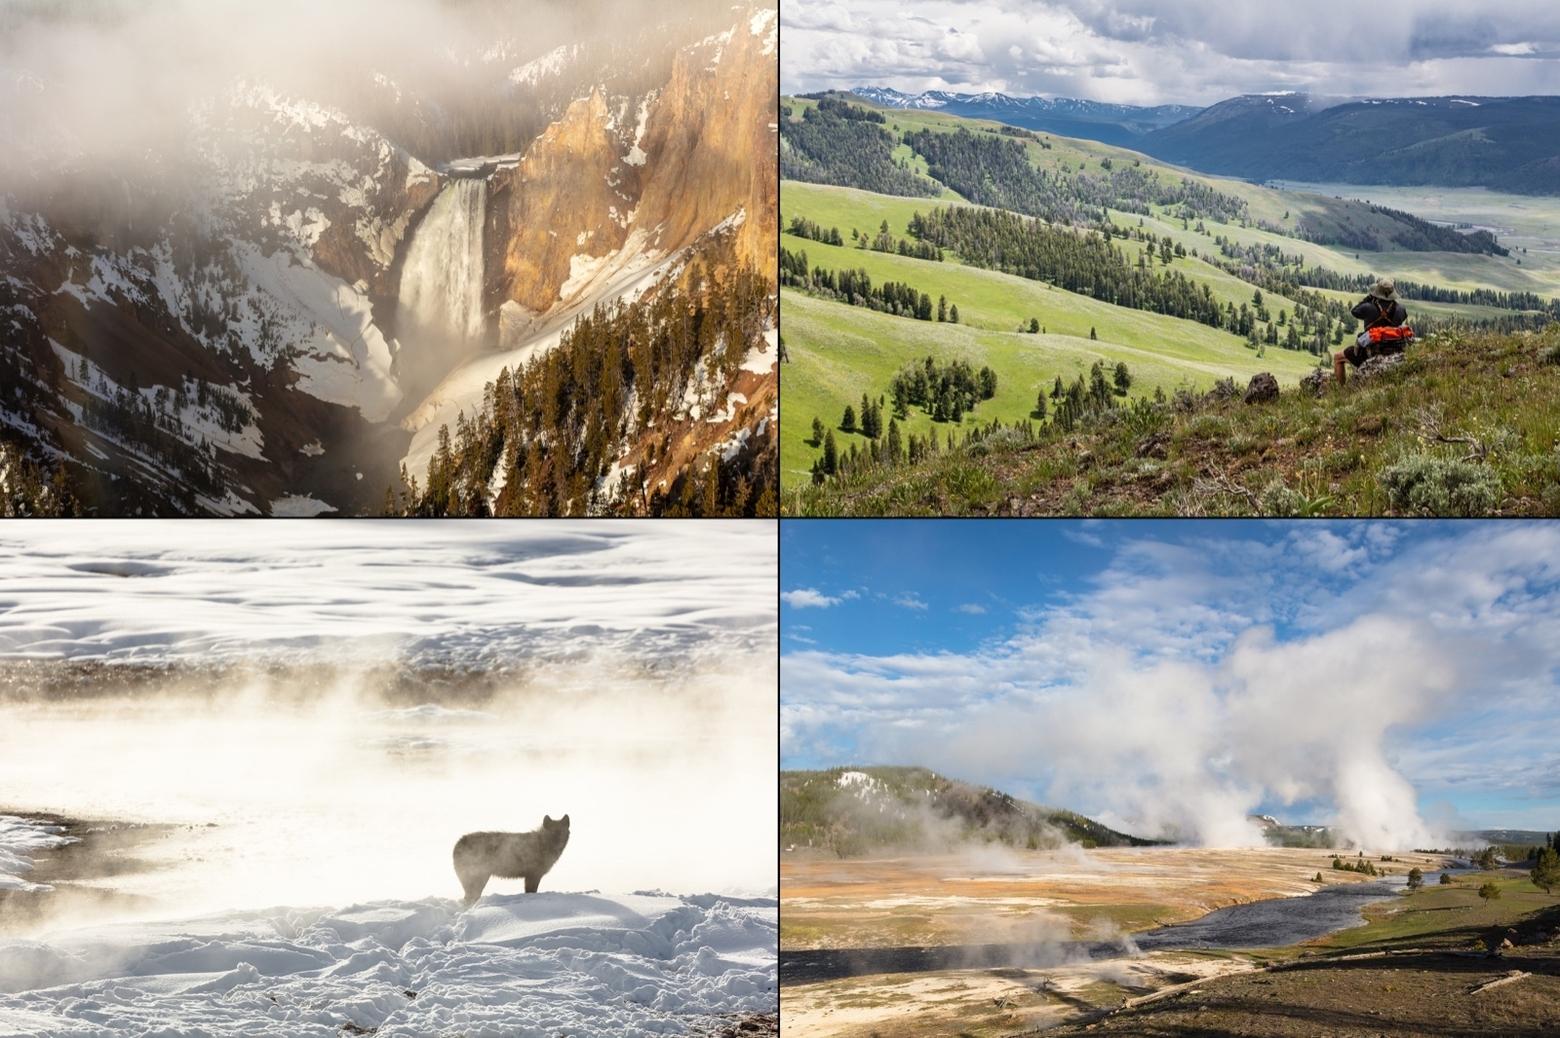 Controversies over Yellowstone dominate the headlines but the mystique and reality of wonderland remains.  Top left: Lower Falls in Grand Canyon of the Yellowstone; upper right: a wildlife watcher scans the high meadows;  lower left:  a silhouetted gray wolves pauses in a wintry river bottom, among a population of lobos that are the most-viewed in the world; lower right:  the geyser basins of Yellowstone are as astounding to modern visitors as they were to ancient ones.  All photos courtesy Jacob W. Frank/NPS